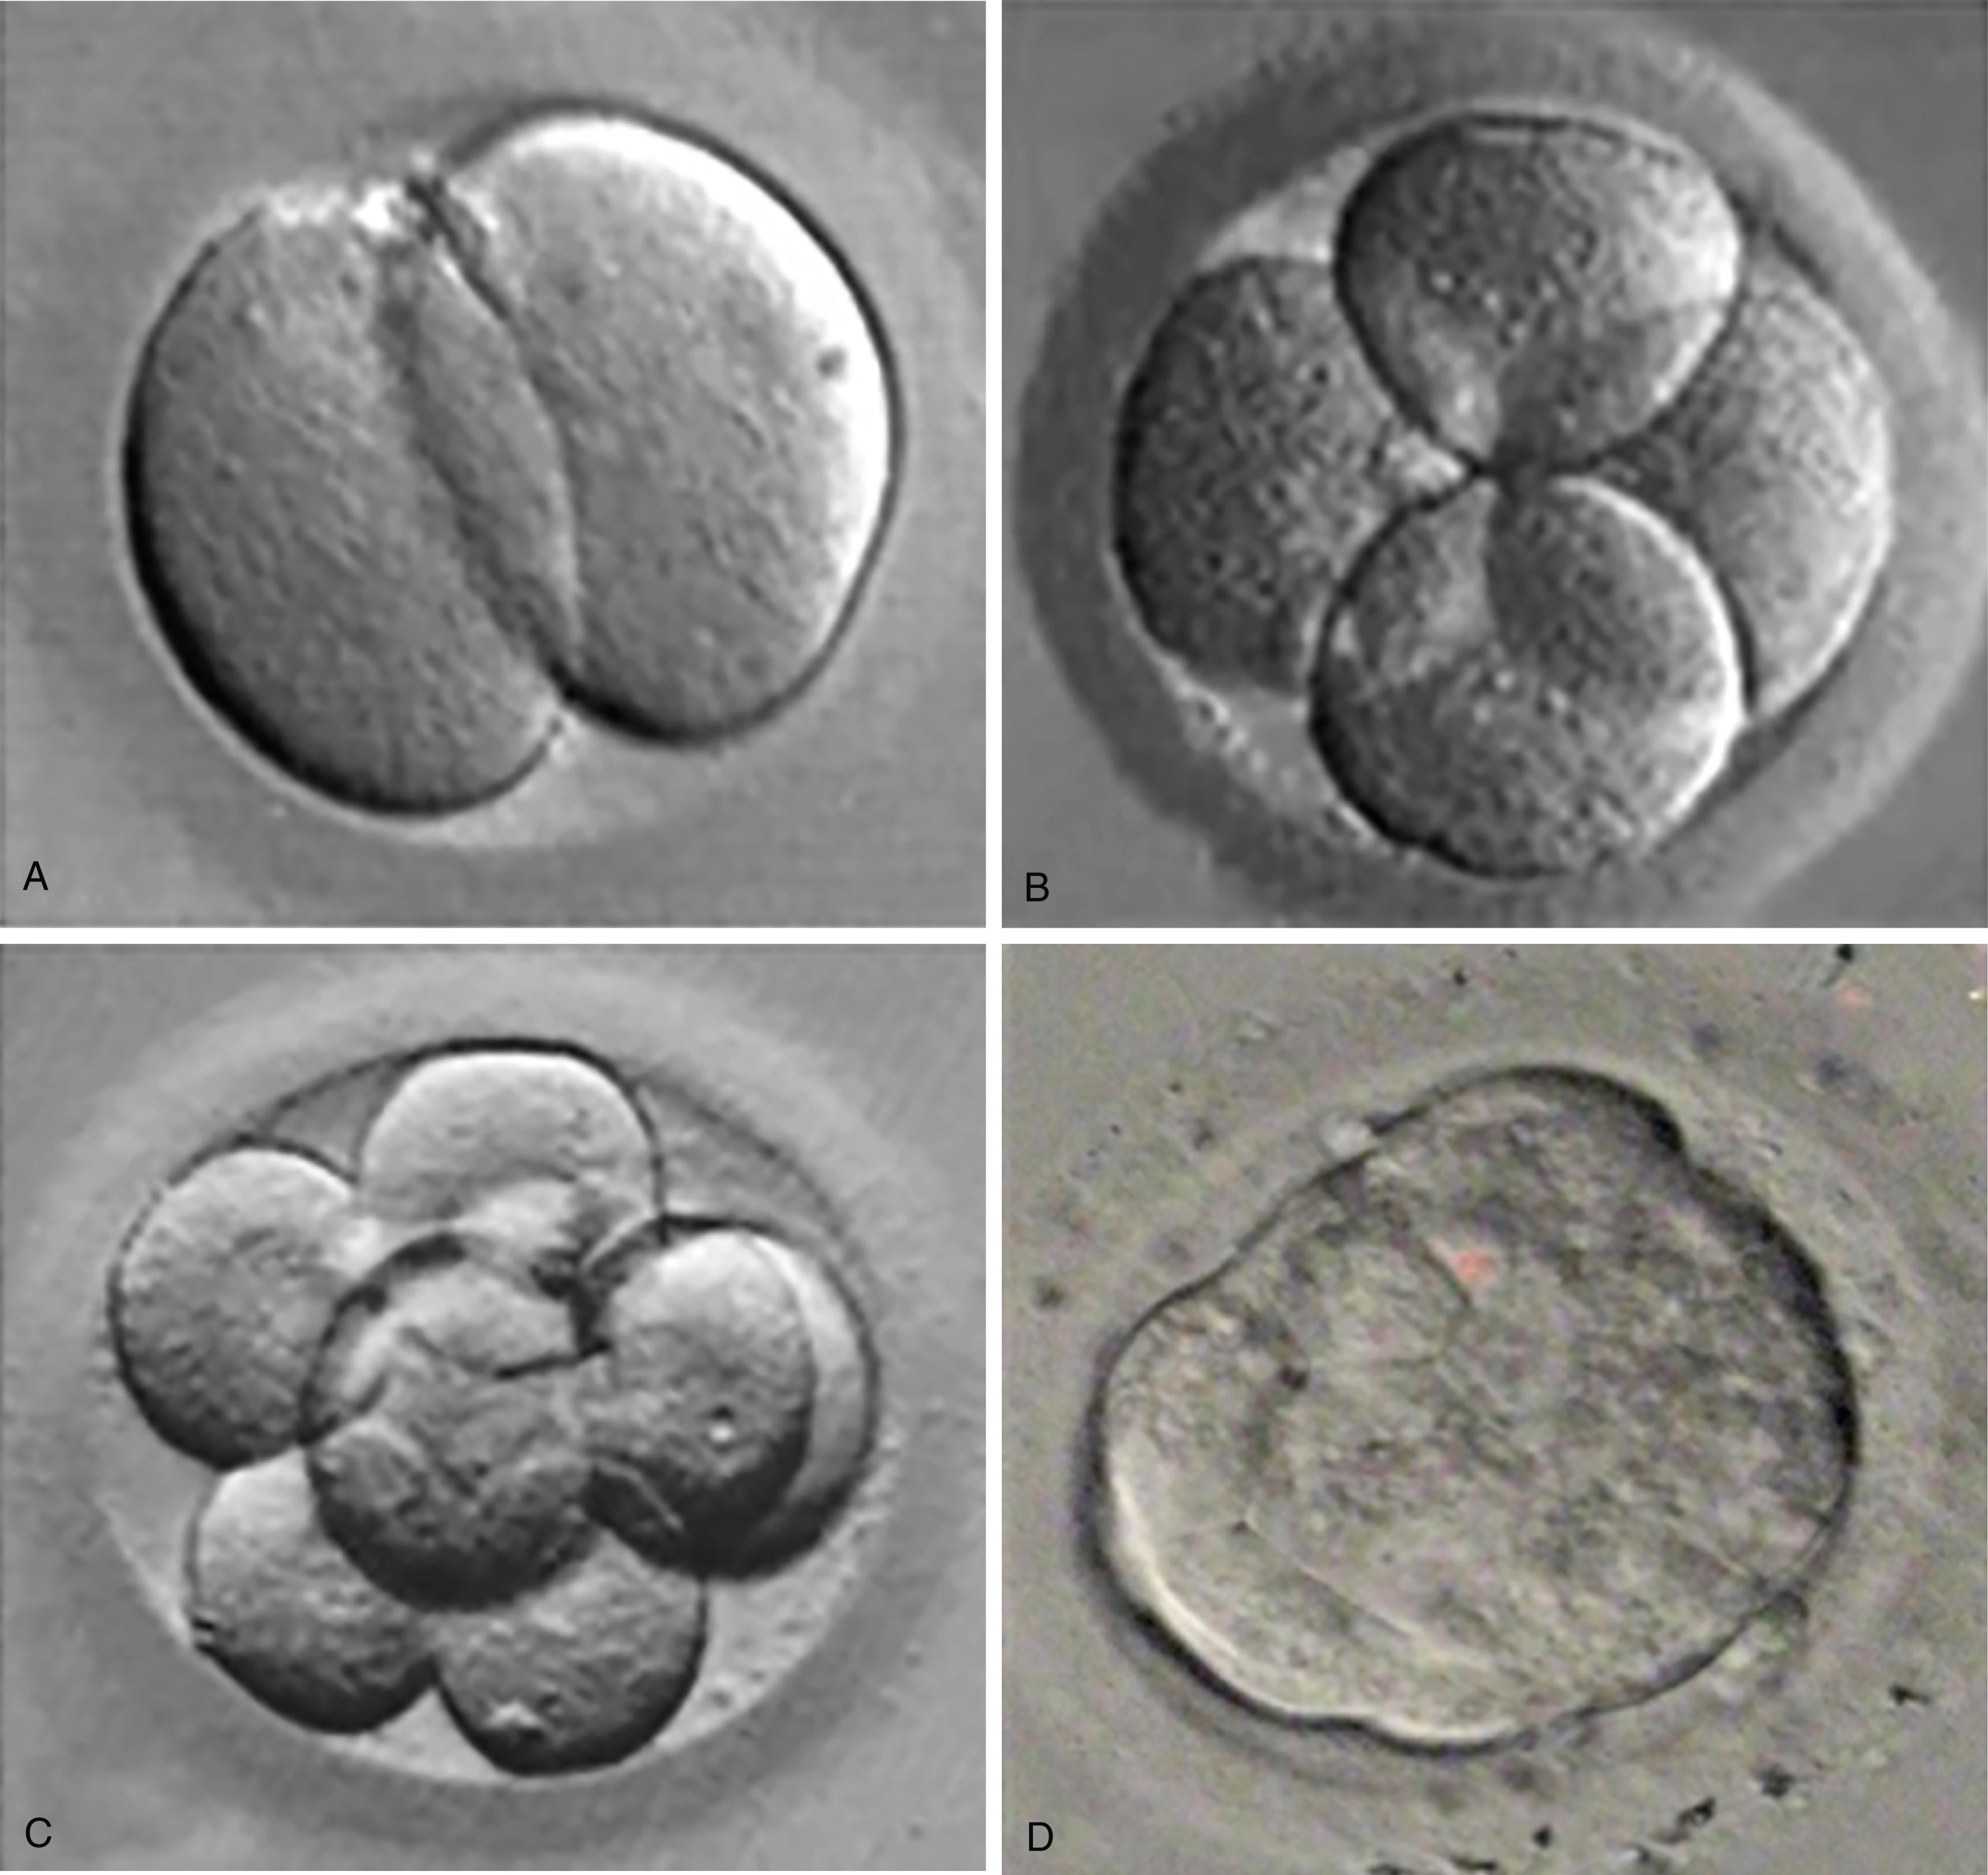 Fig. 4.2, Photomicrographs of cleavage stages of human eggs fertilized in vitro.